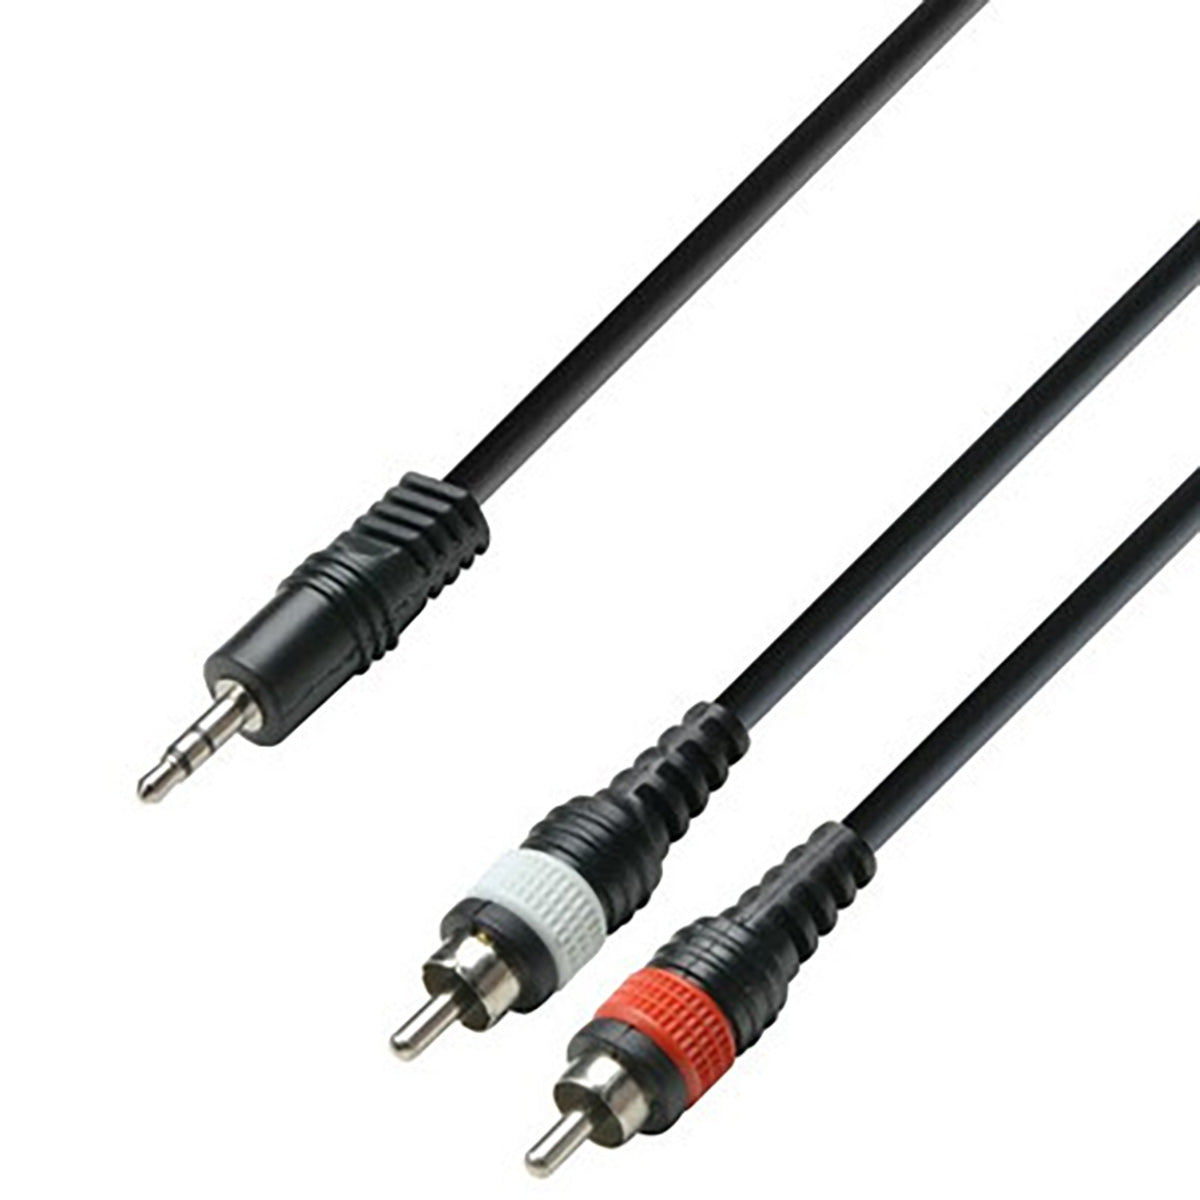 Adam Hall Cables K3 YWCC 0600 - Audio Cable 3.5mm Jack stereo to 2 x RCA male 6m